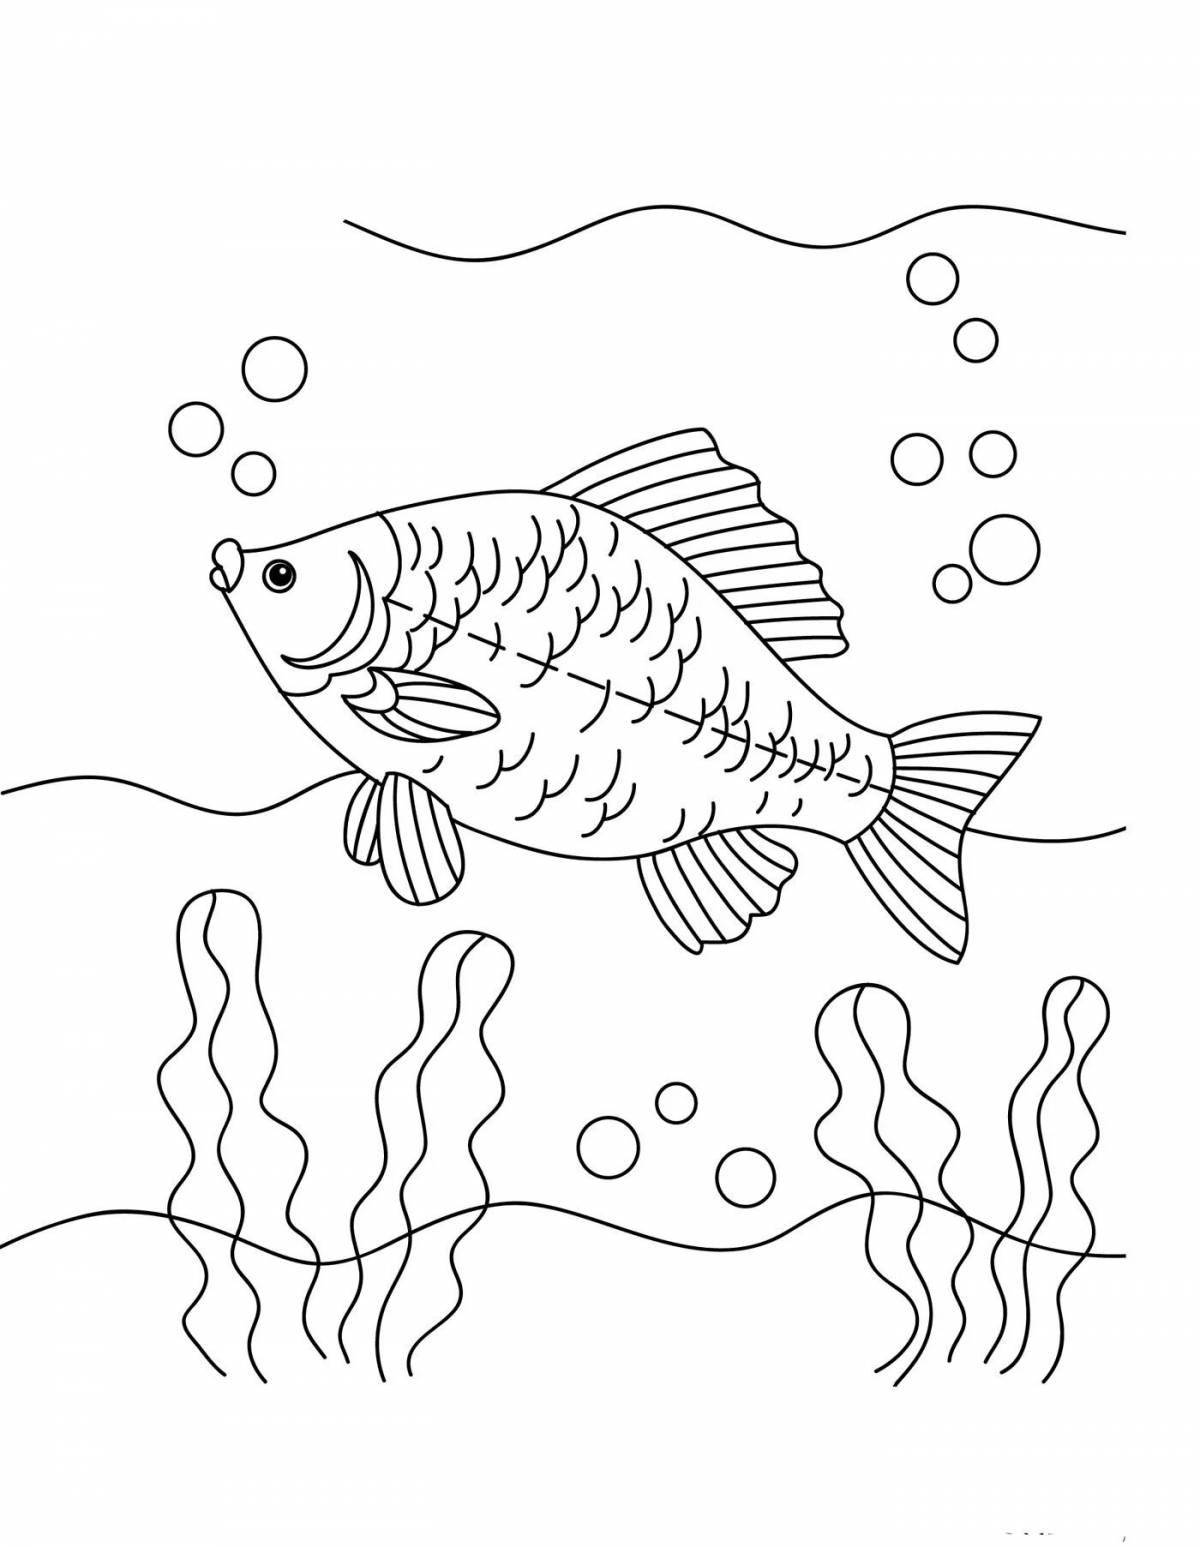 Charming river fish coloring page